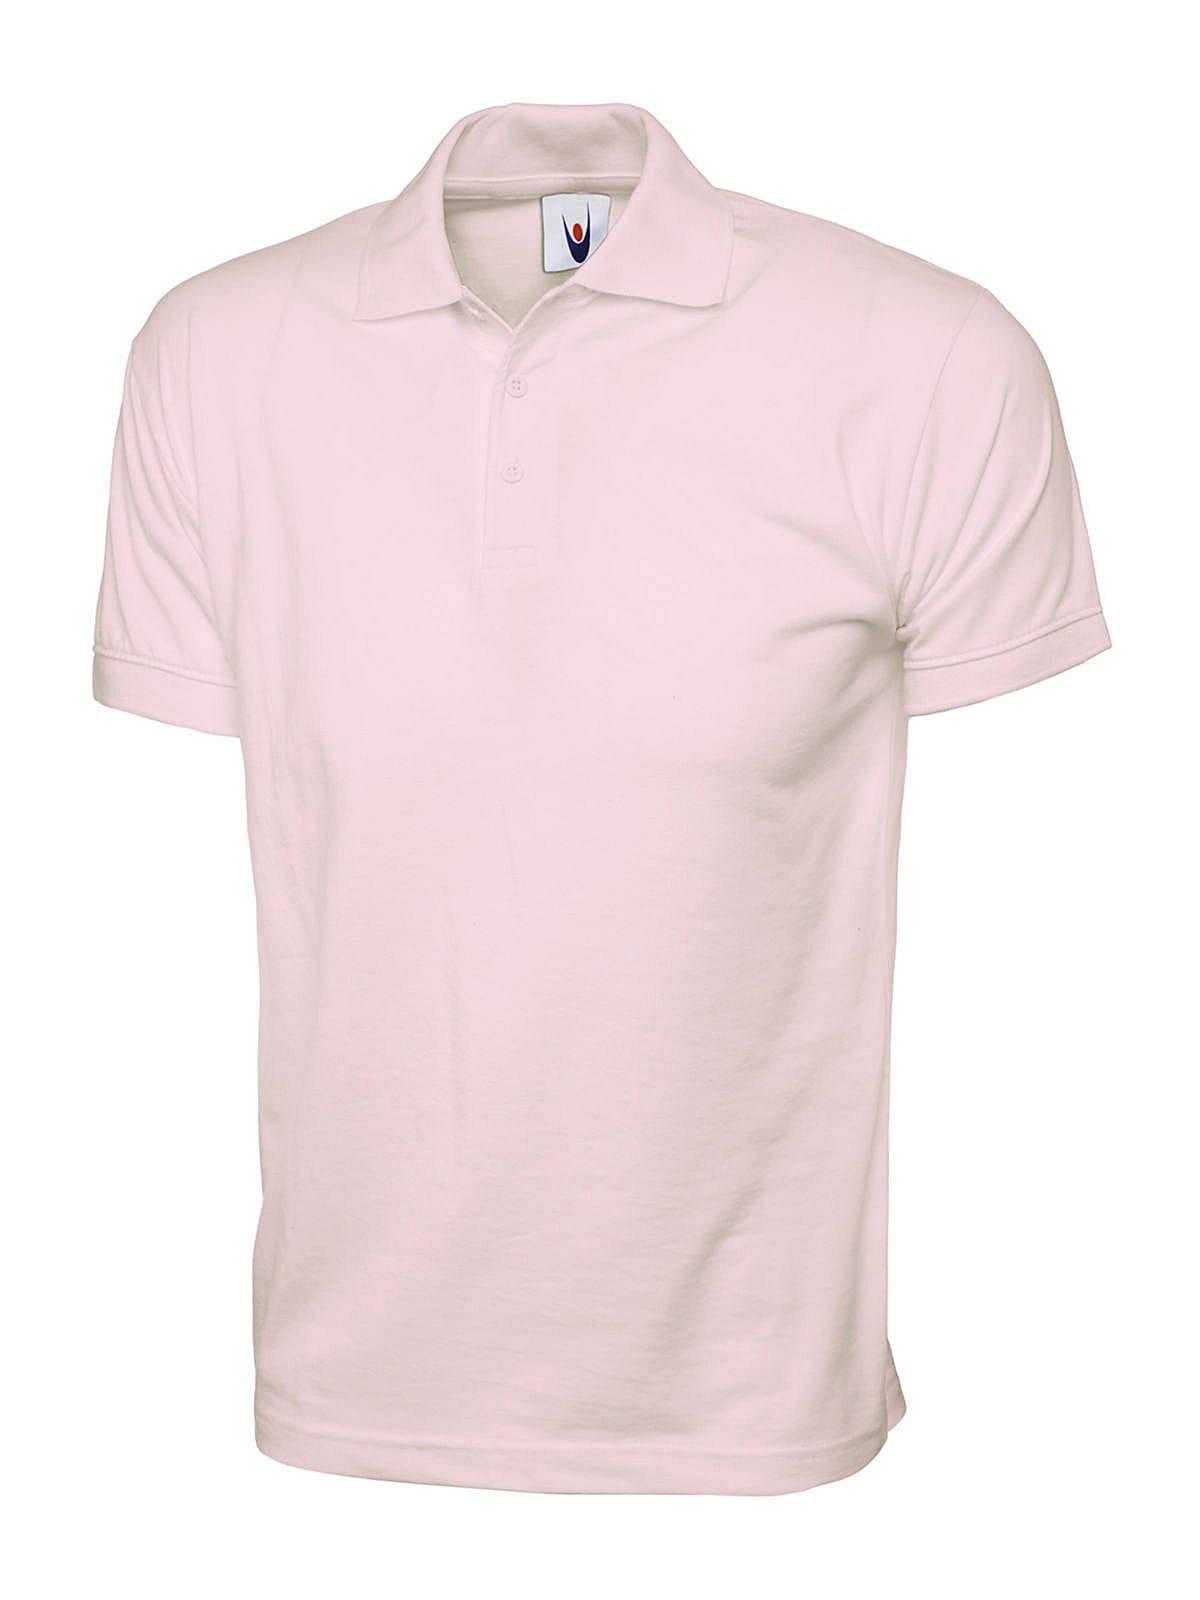 Uneek 200GSM Jersey Polo Shirt in Pink (Product Code: UC122)